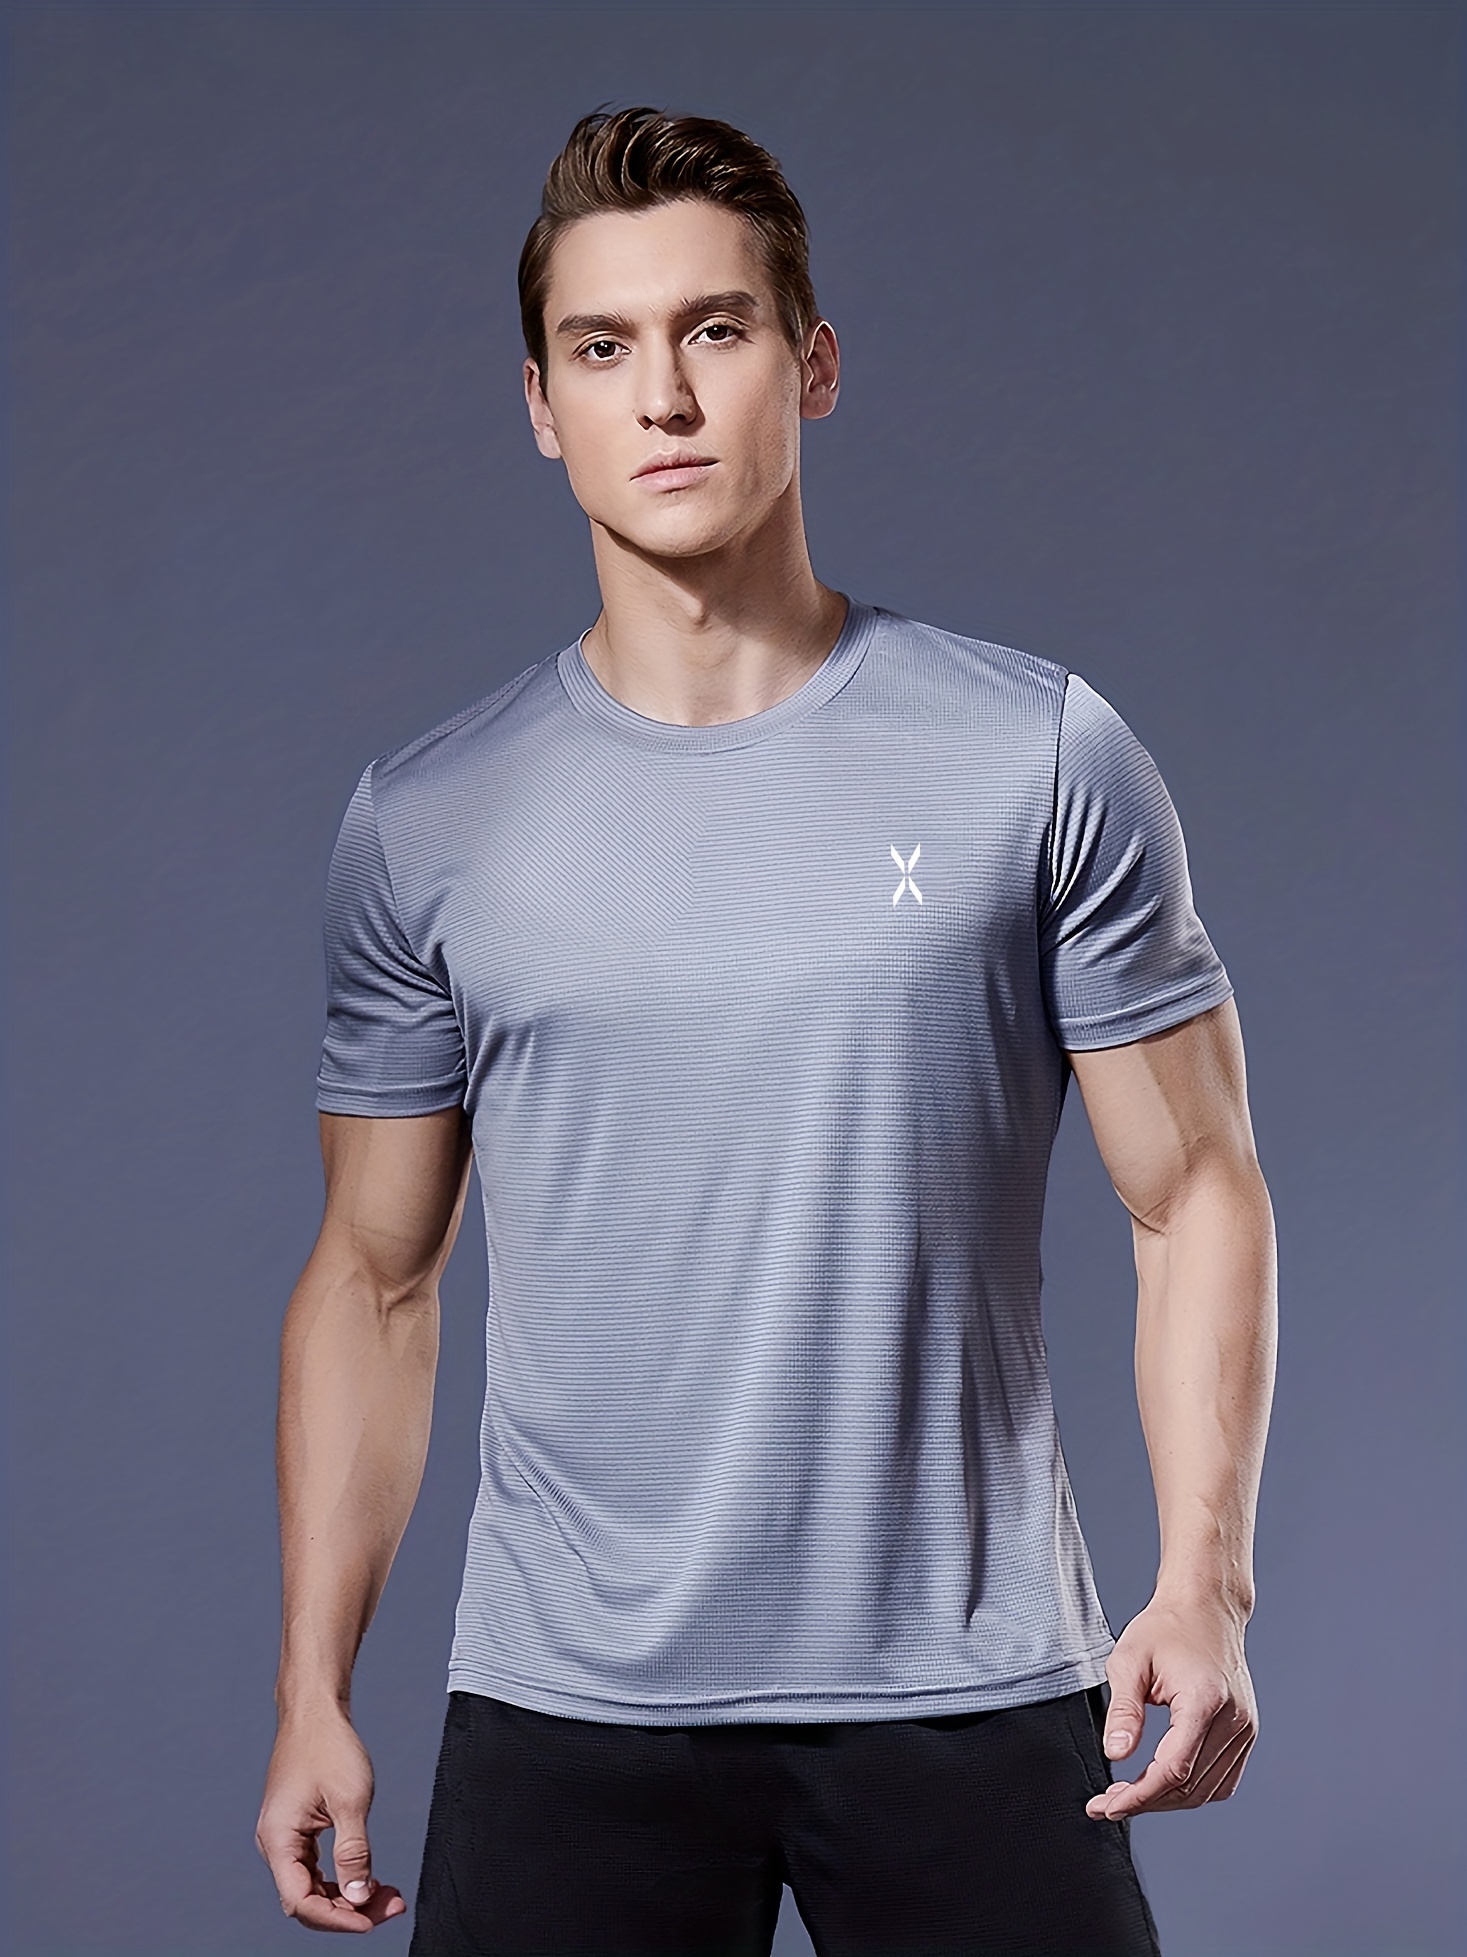 Men's Short Sleeve Ultralight Athletic T-Shirt: Quick Drying Lightweight  Performance For Running, Training, Fitness & Gym Workouts